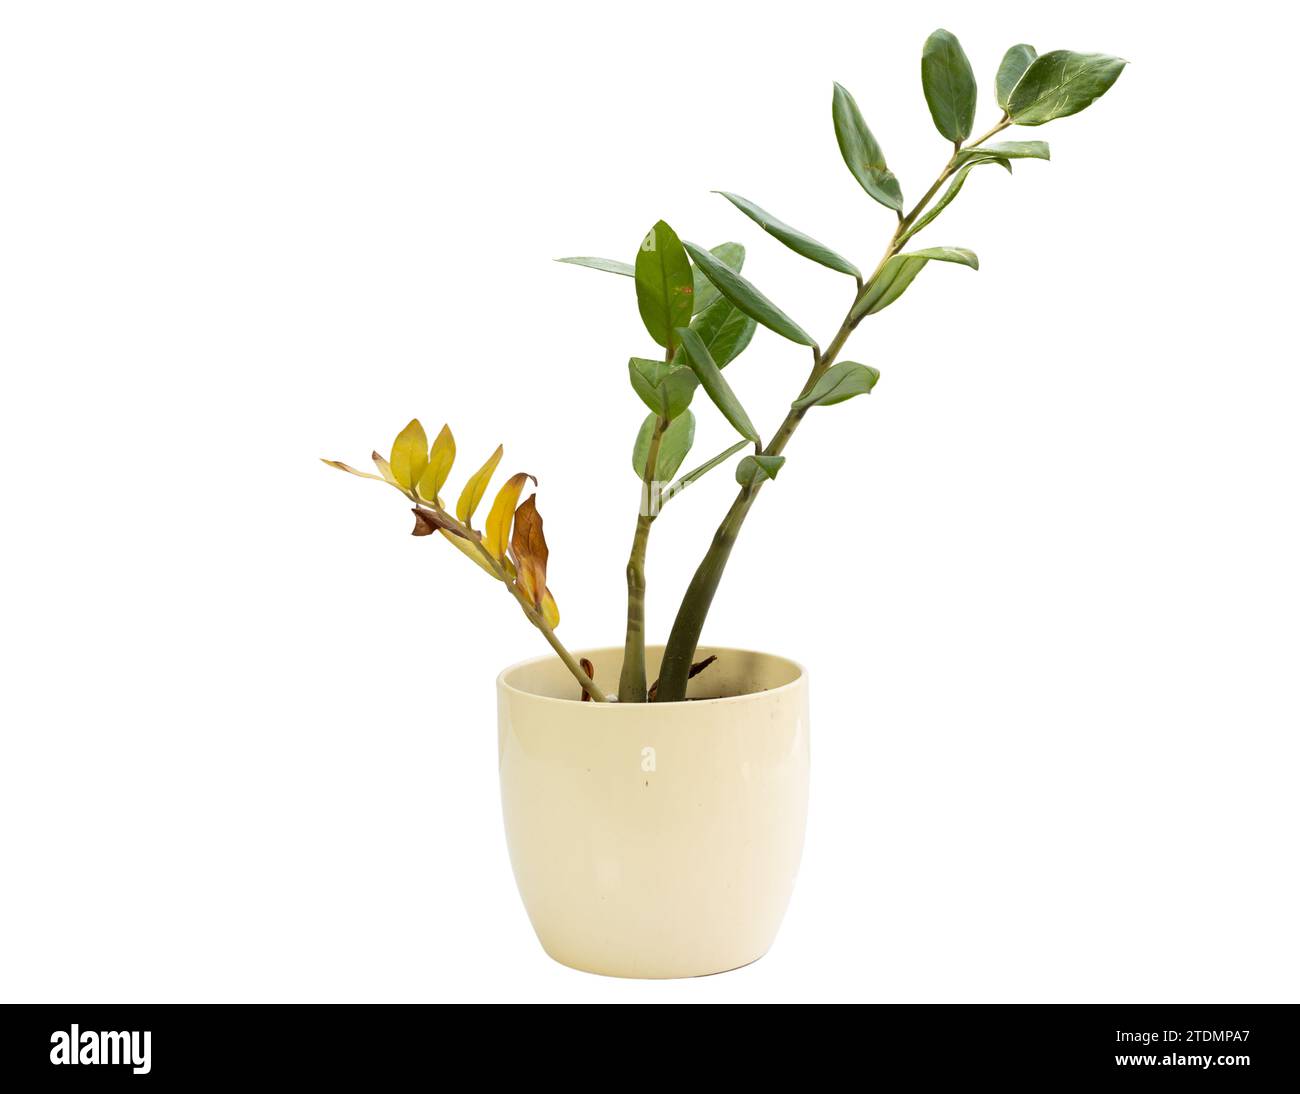 ZZ plant with yellowing leaves and wrinkled stem isolated on white background Stock Photo